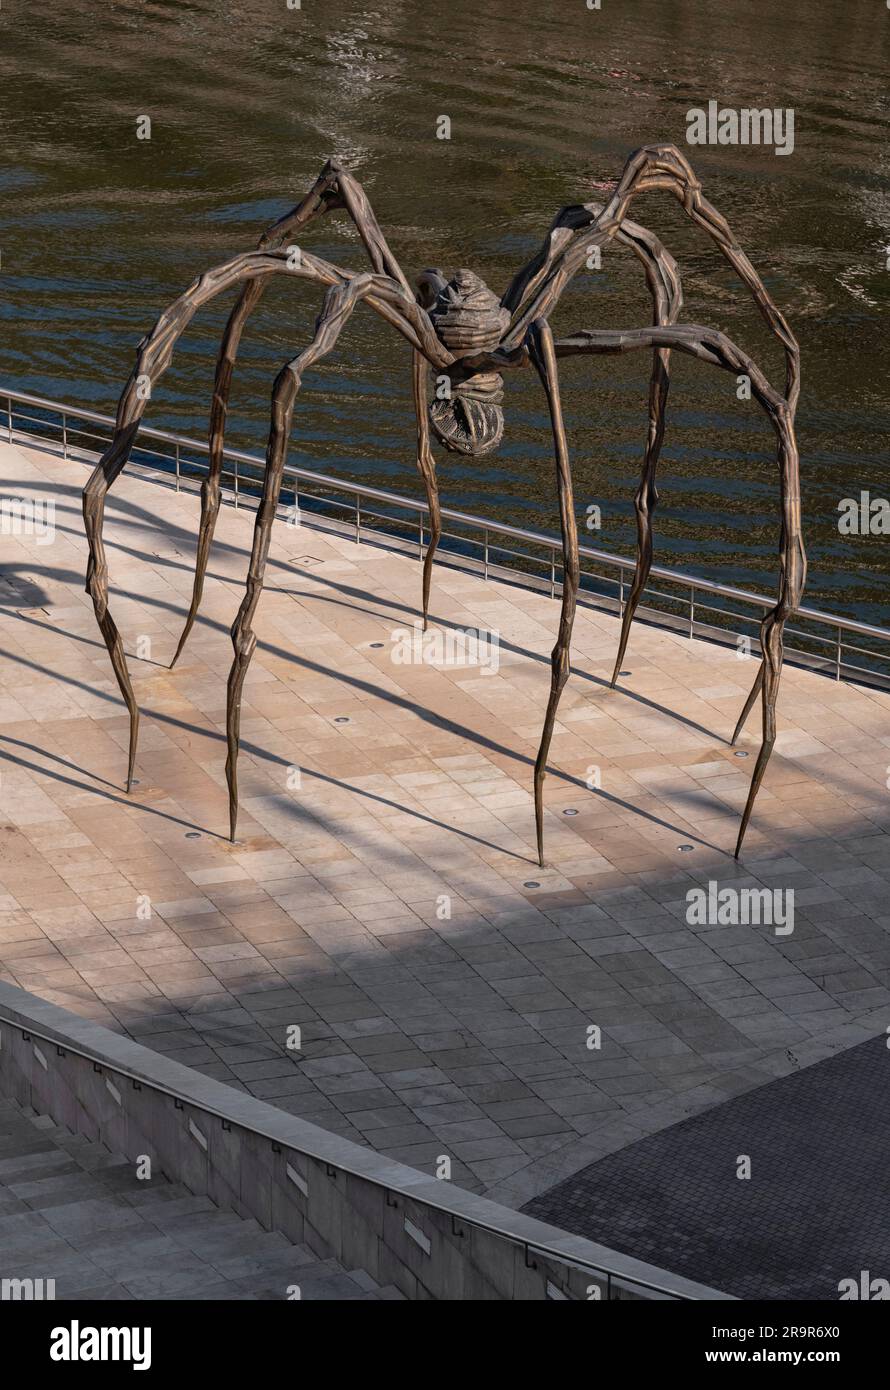 Spain, Basque Country, Bilbao, Guggenheim Museum area, Maman is a bronze, stainless steel, and marble sculpture of a spider by the artist Louise Bourg Stock Photo